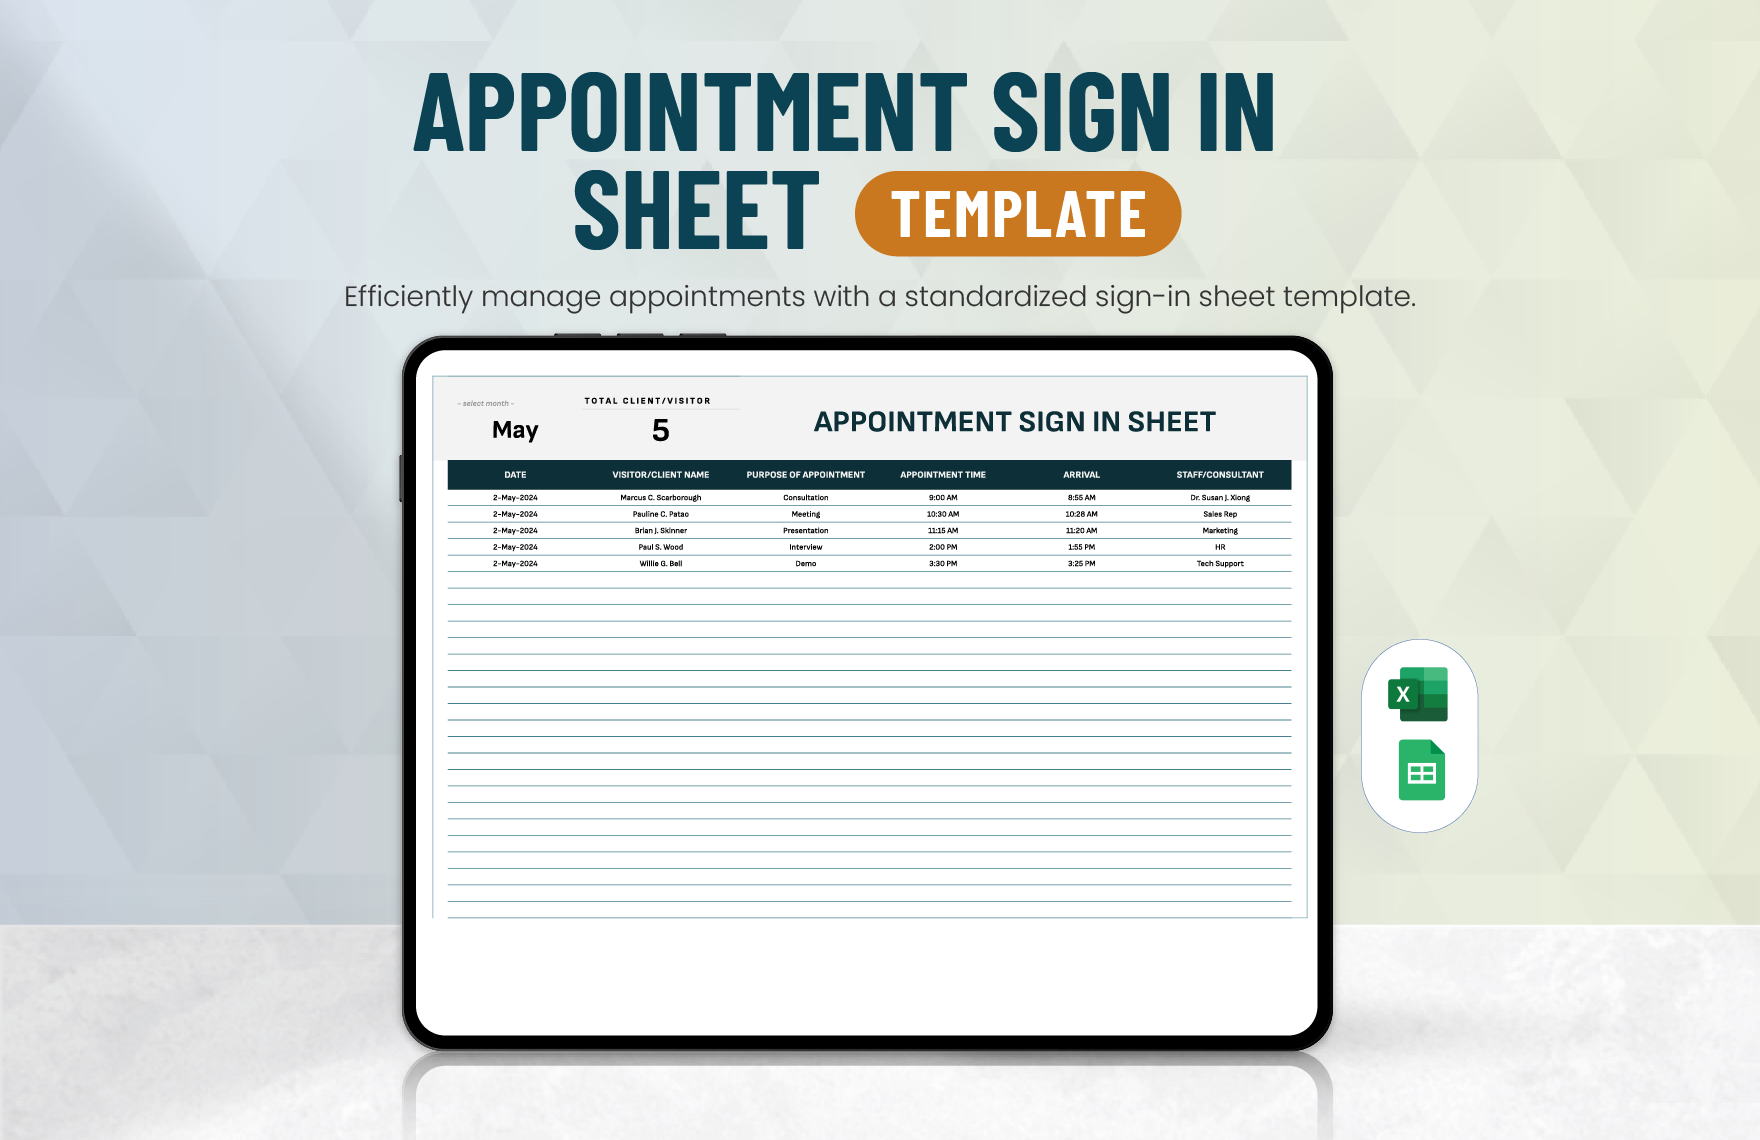 Appointment Sign in Sheet Template in Excel, Google Sheets